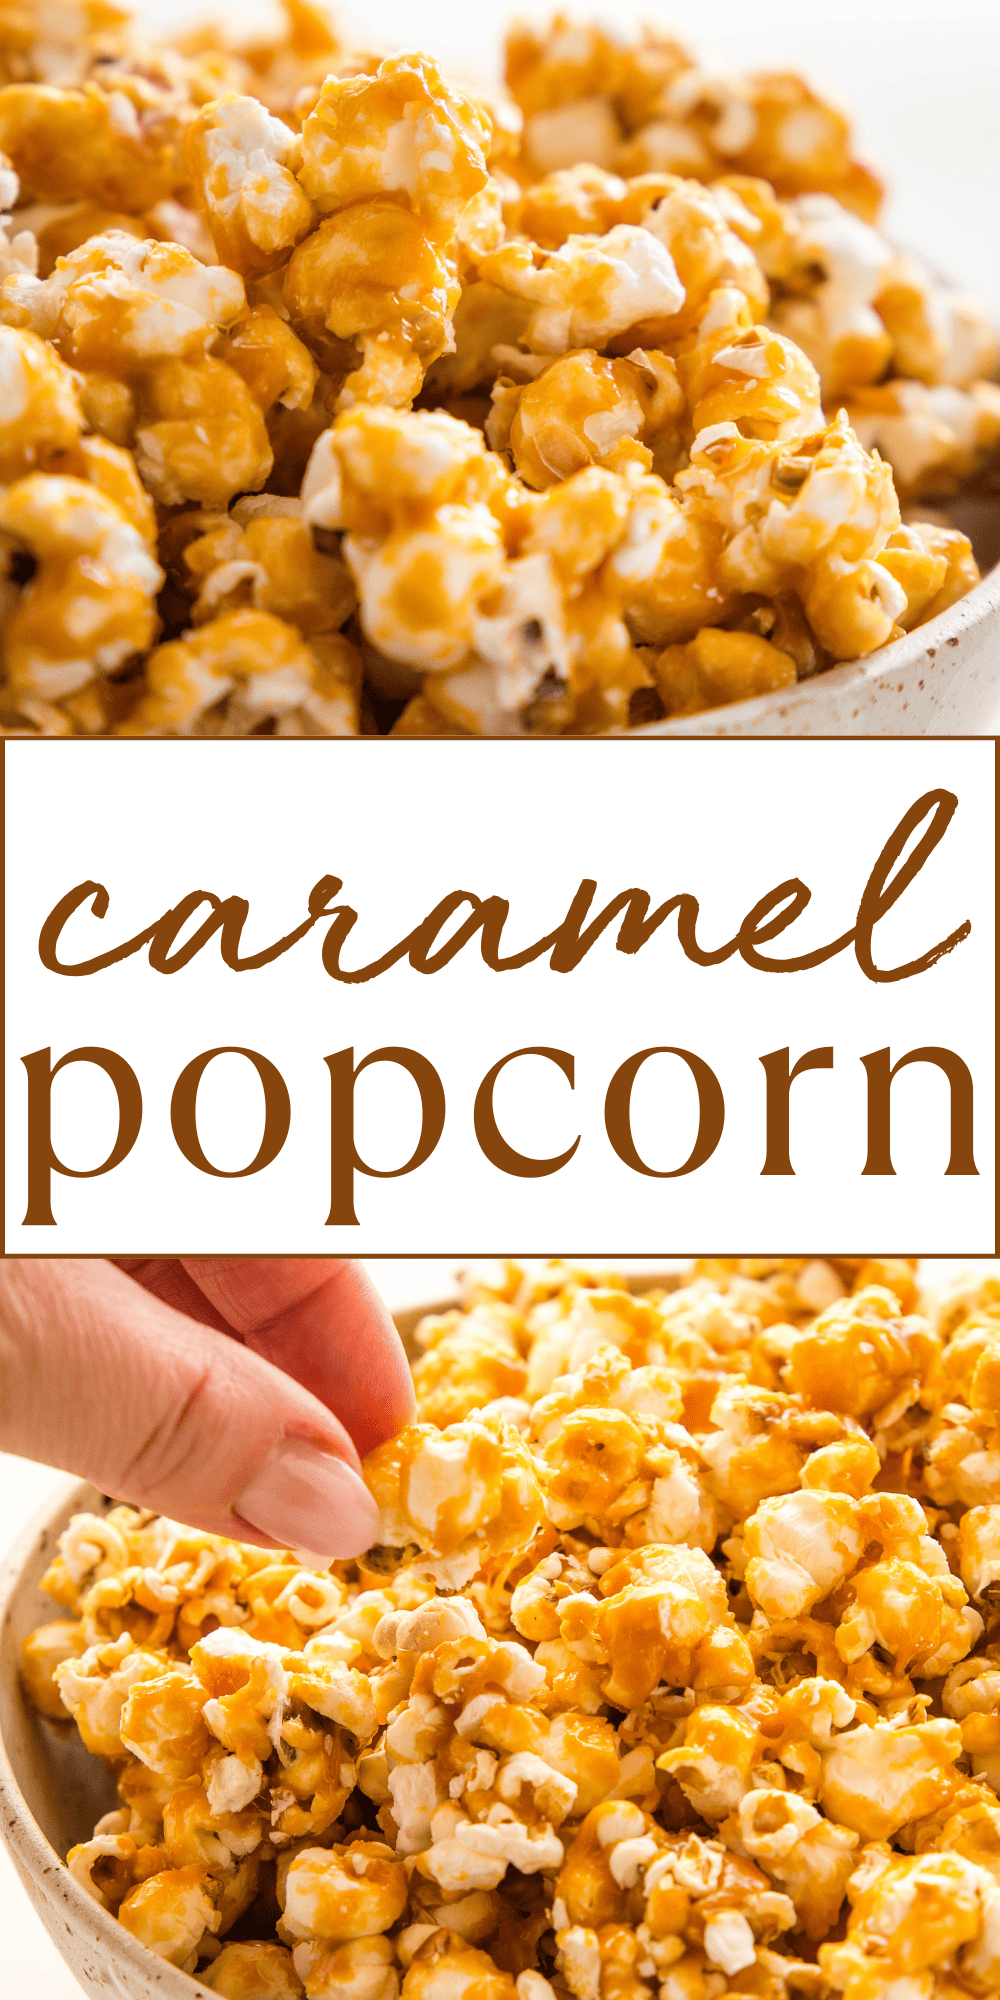 This Caramel Popcorn recipe is the perfect sweet treat that's easy to make in one pan. The BEST easy caramel corn recipe made with basic ingredients in 15 minutes or less! Recipe from thebusybaker.ca! #caramelpopcorn #easycaramelcorn #carmelcorn #caramelcorn #homemadepopcorn #ediblegift #christmaspopcorn #christmas #holidays #caramel #homemadecaramel #sweettreat #dessert #sweets via @busybakerblog